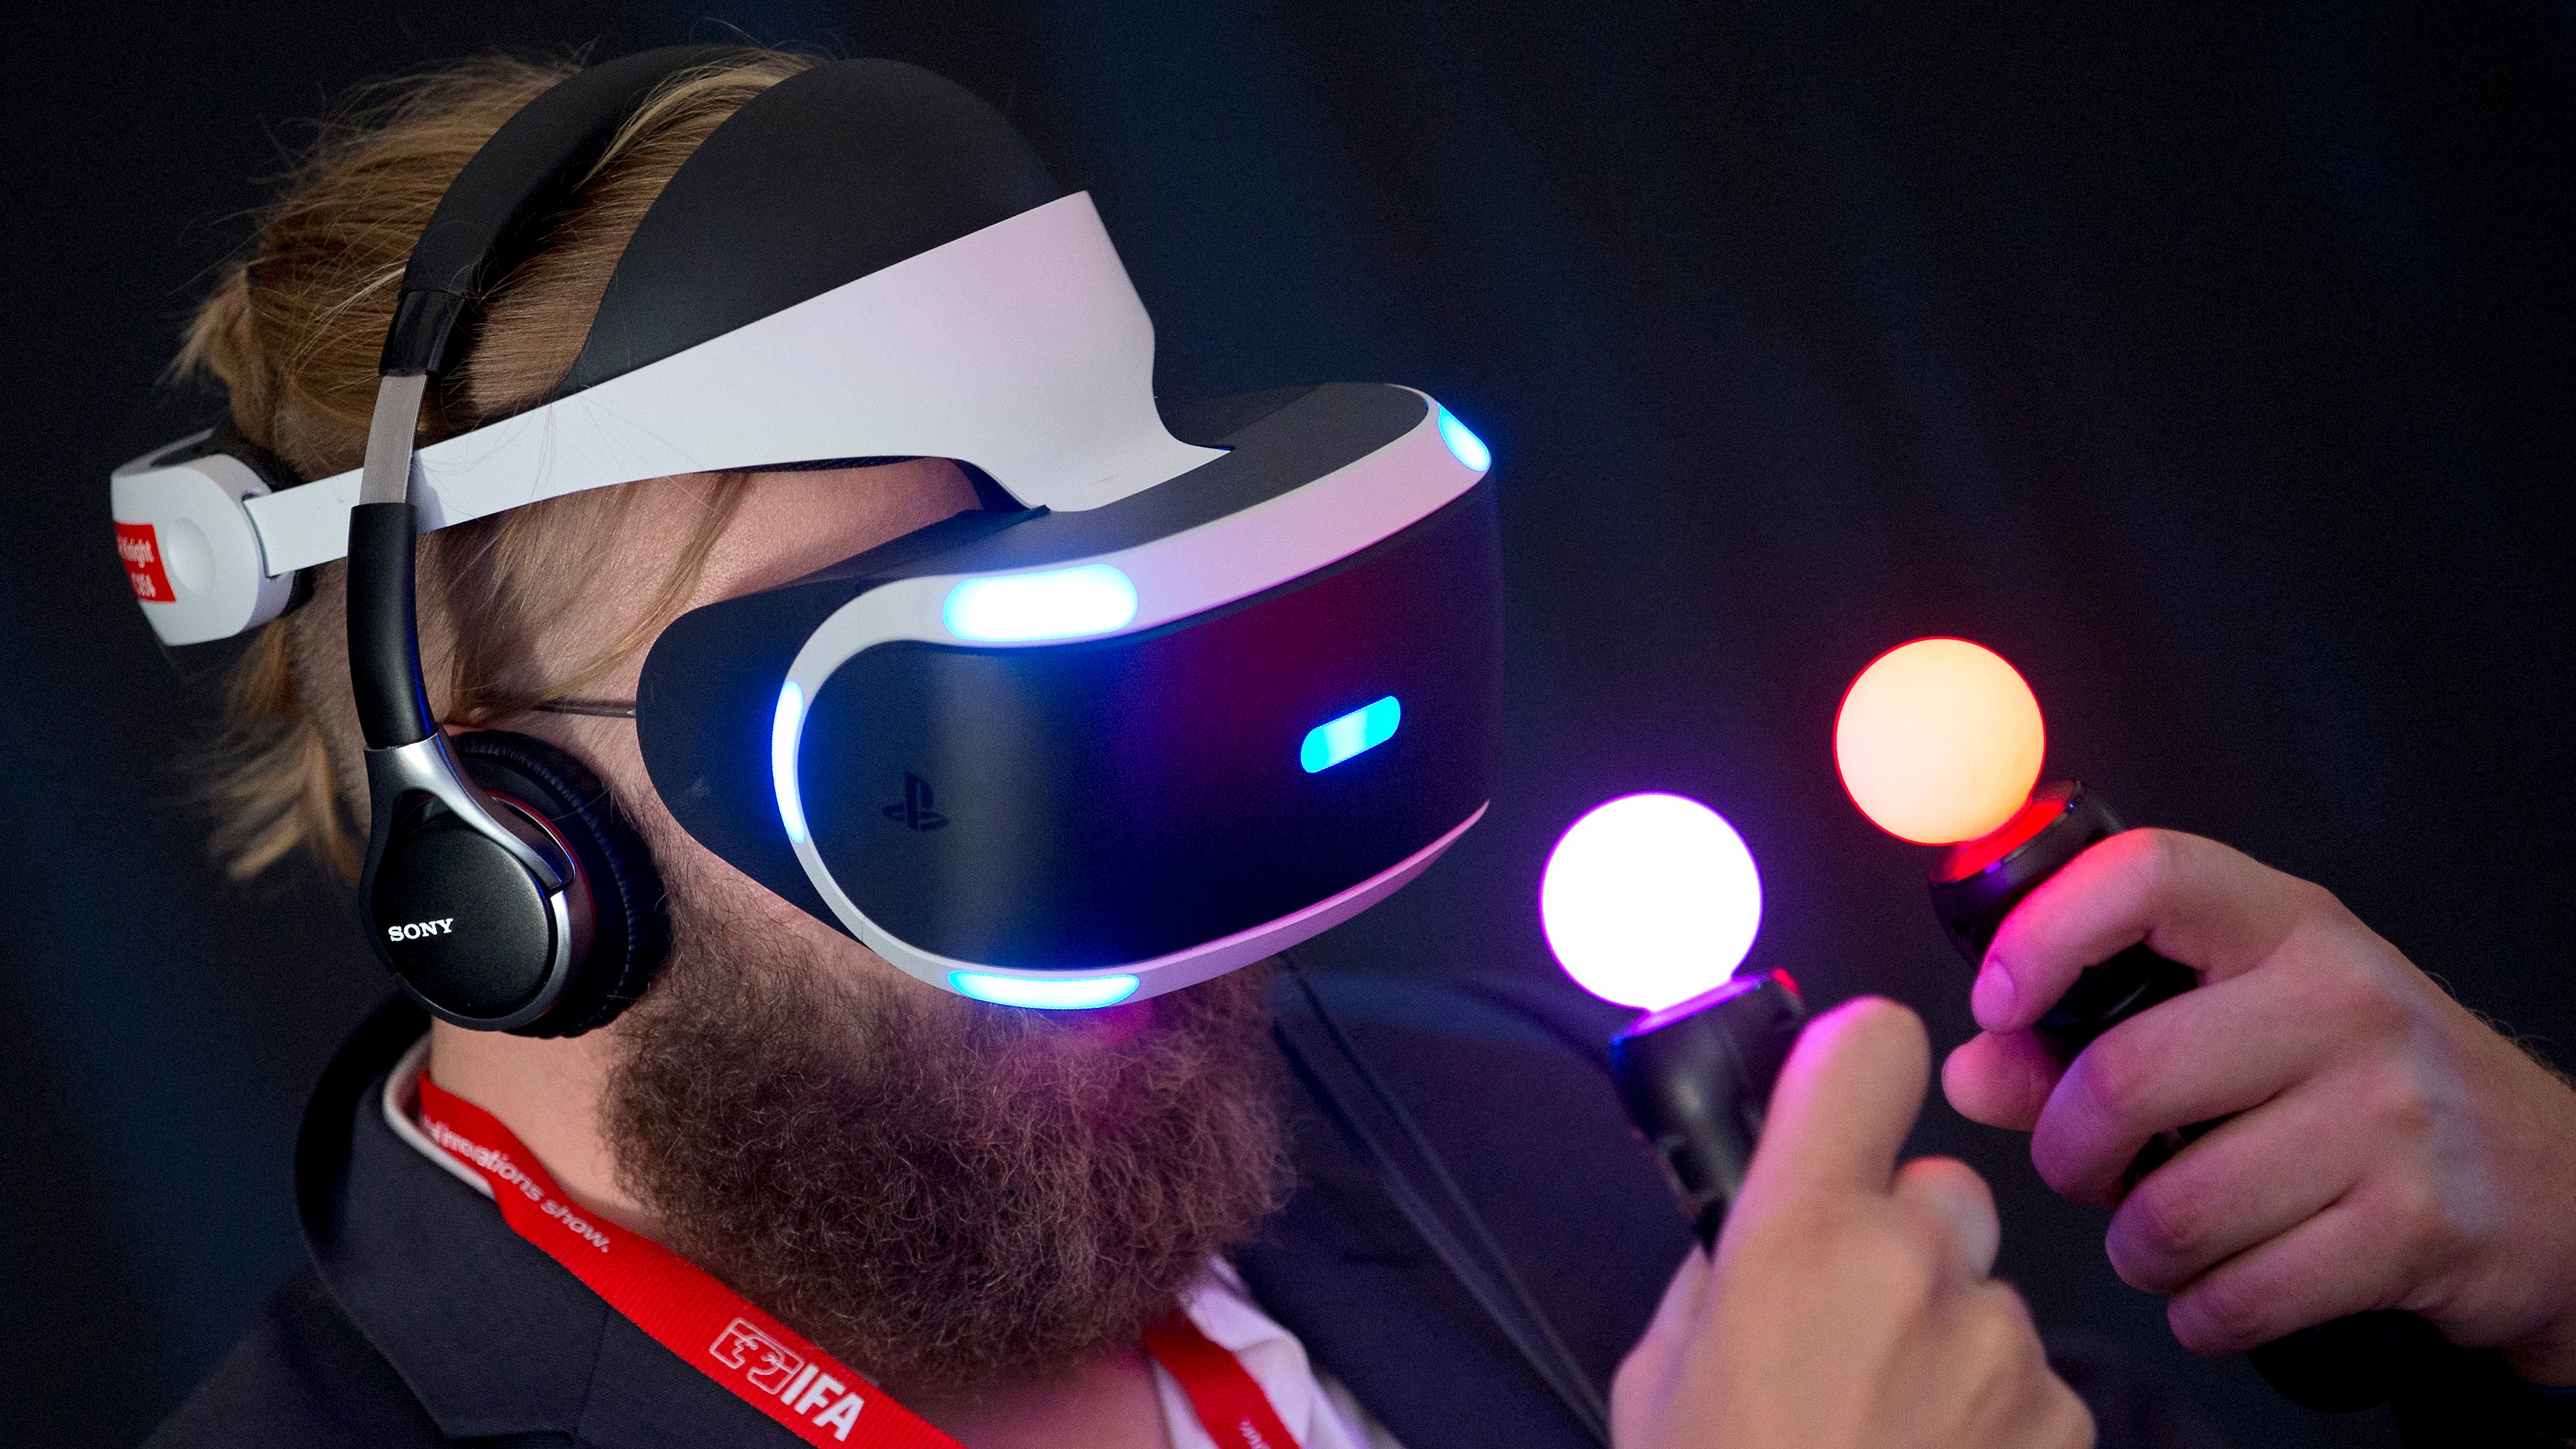 Gizmodo Australia Podcast: Which VR Tech Is Most Likely To Succeed?